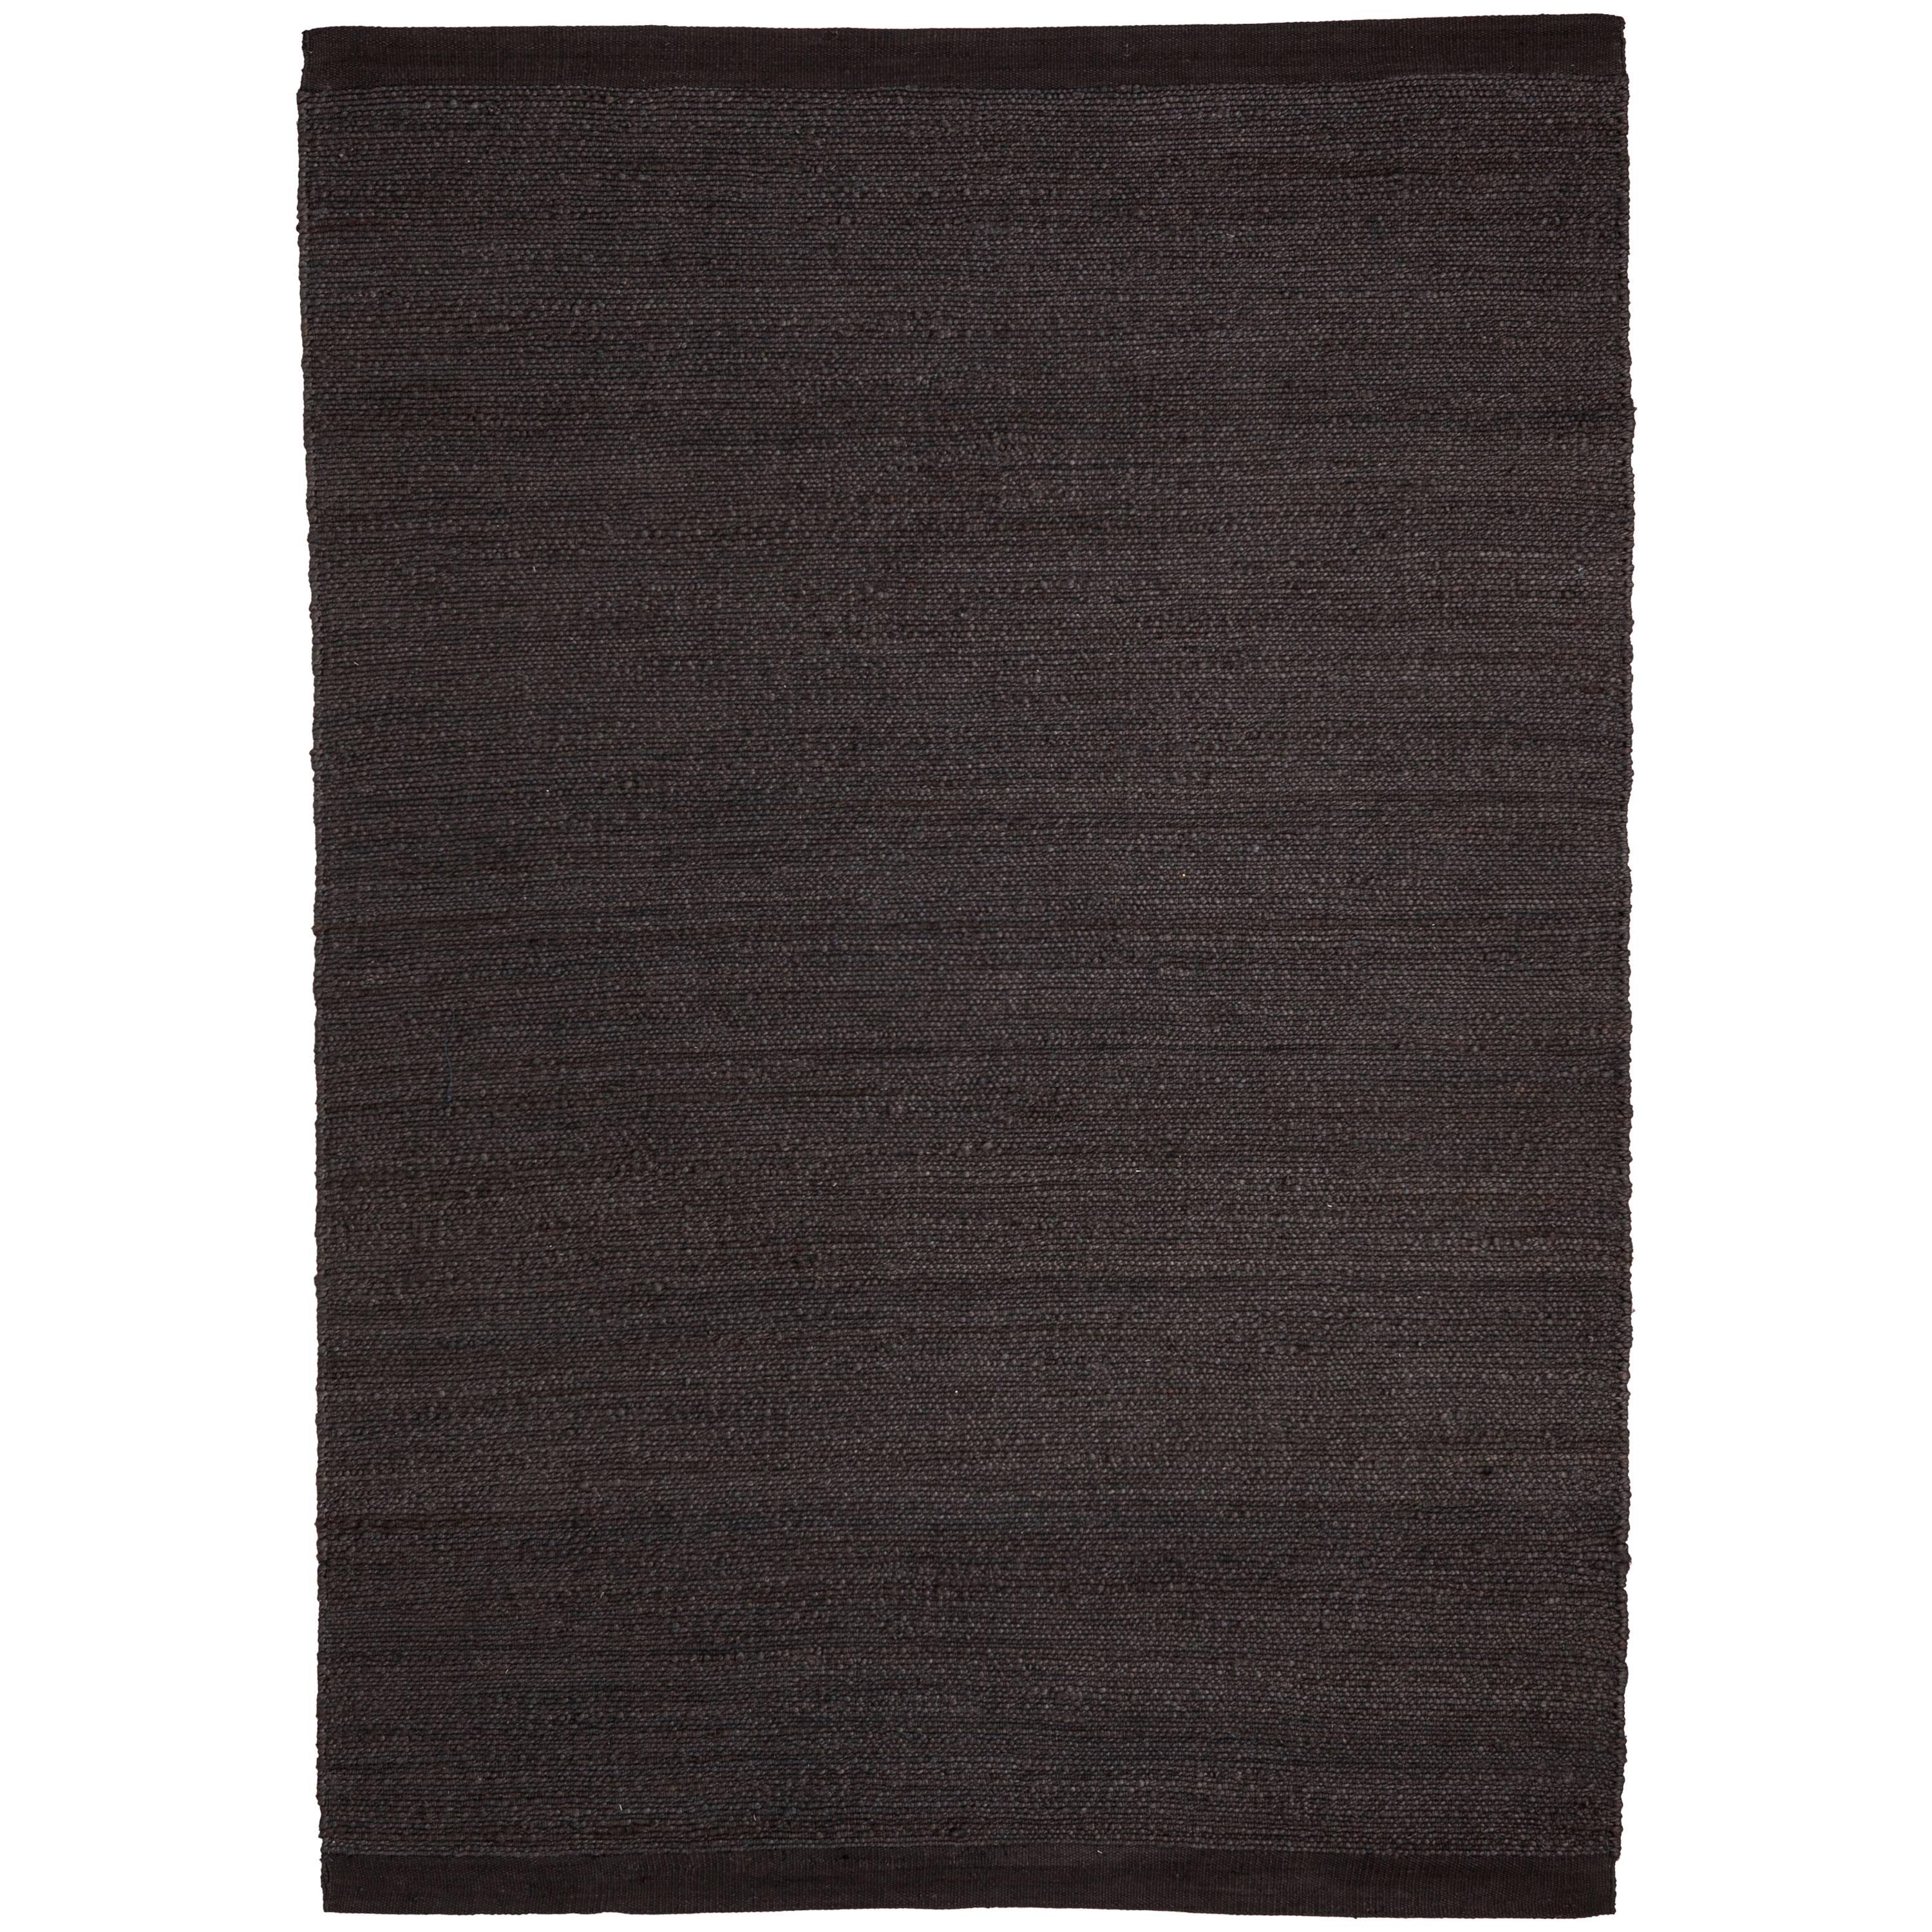 Hand-Loomed Herb Rug by Nani Marquina in Black/Charcoal, Extra Large